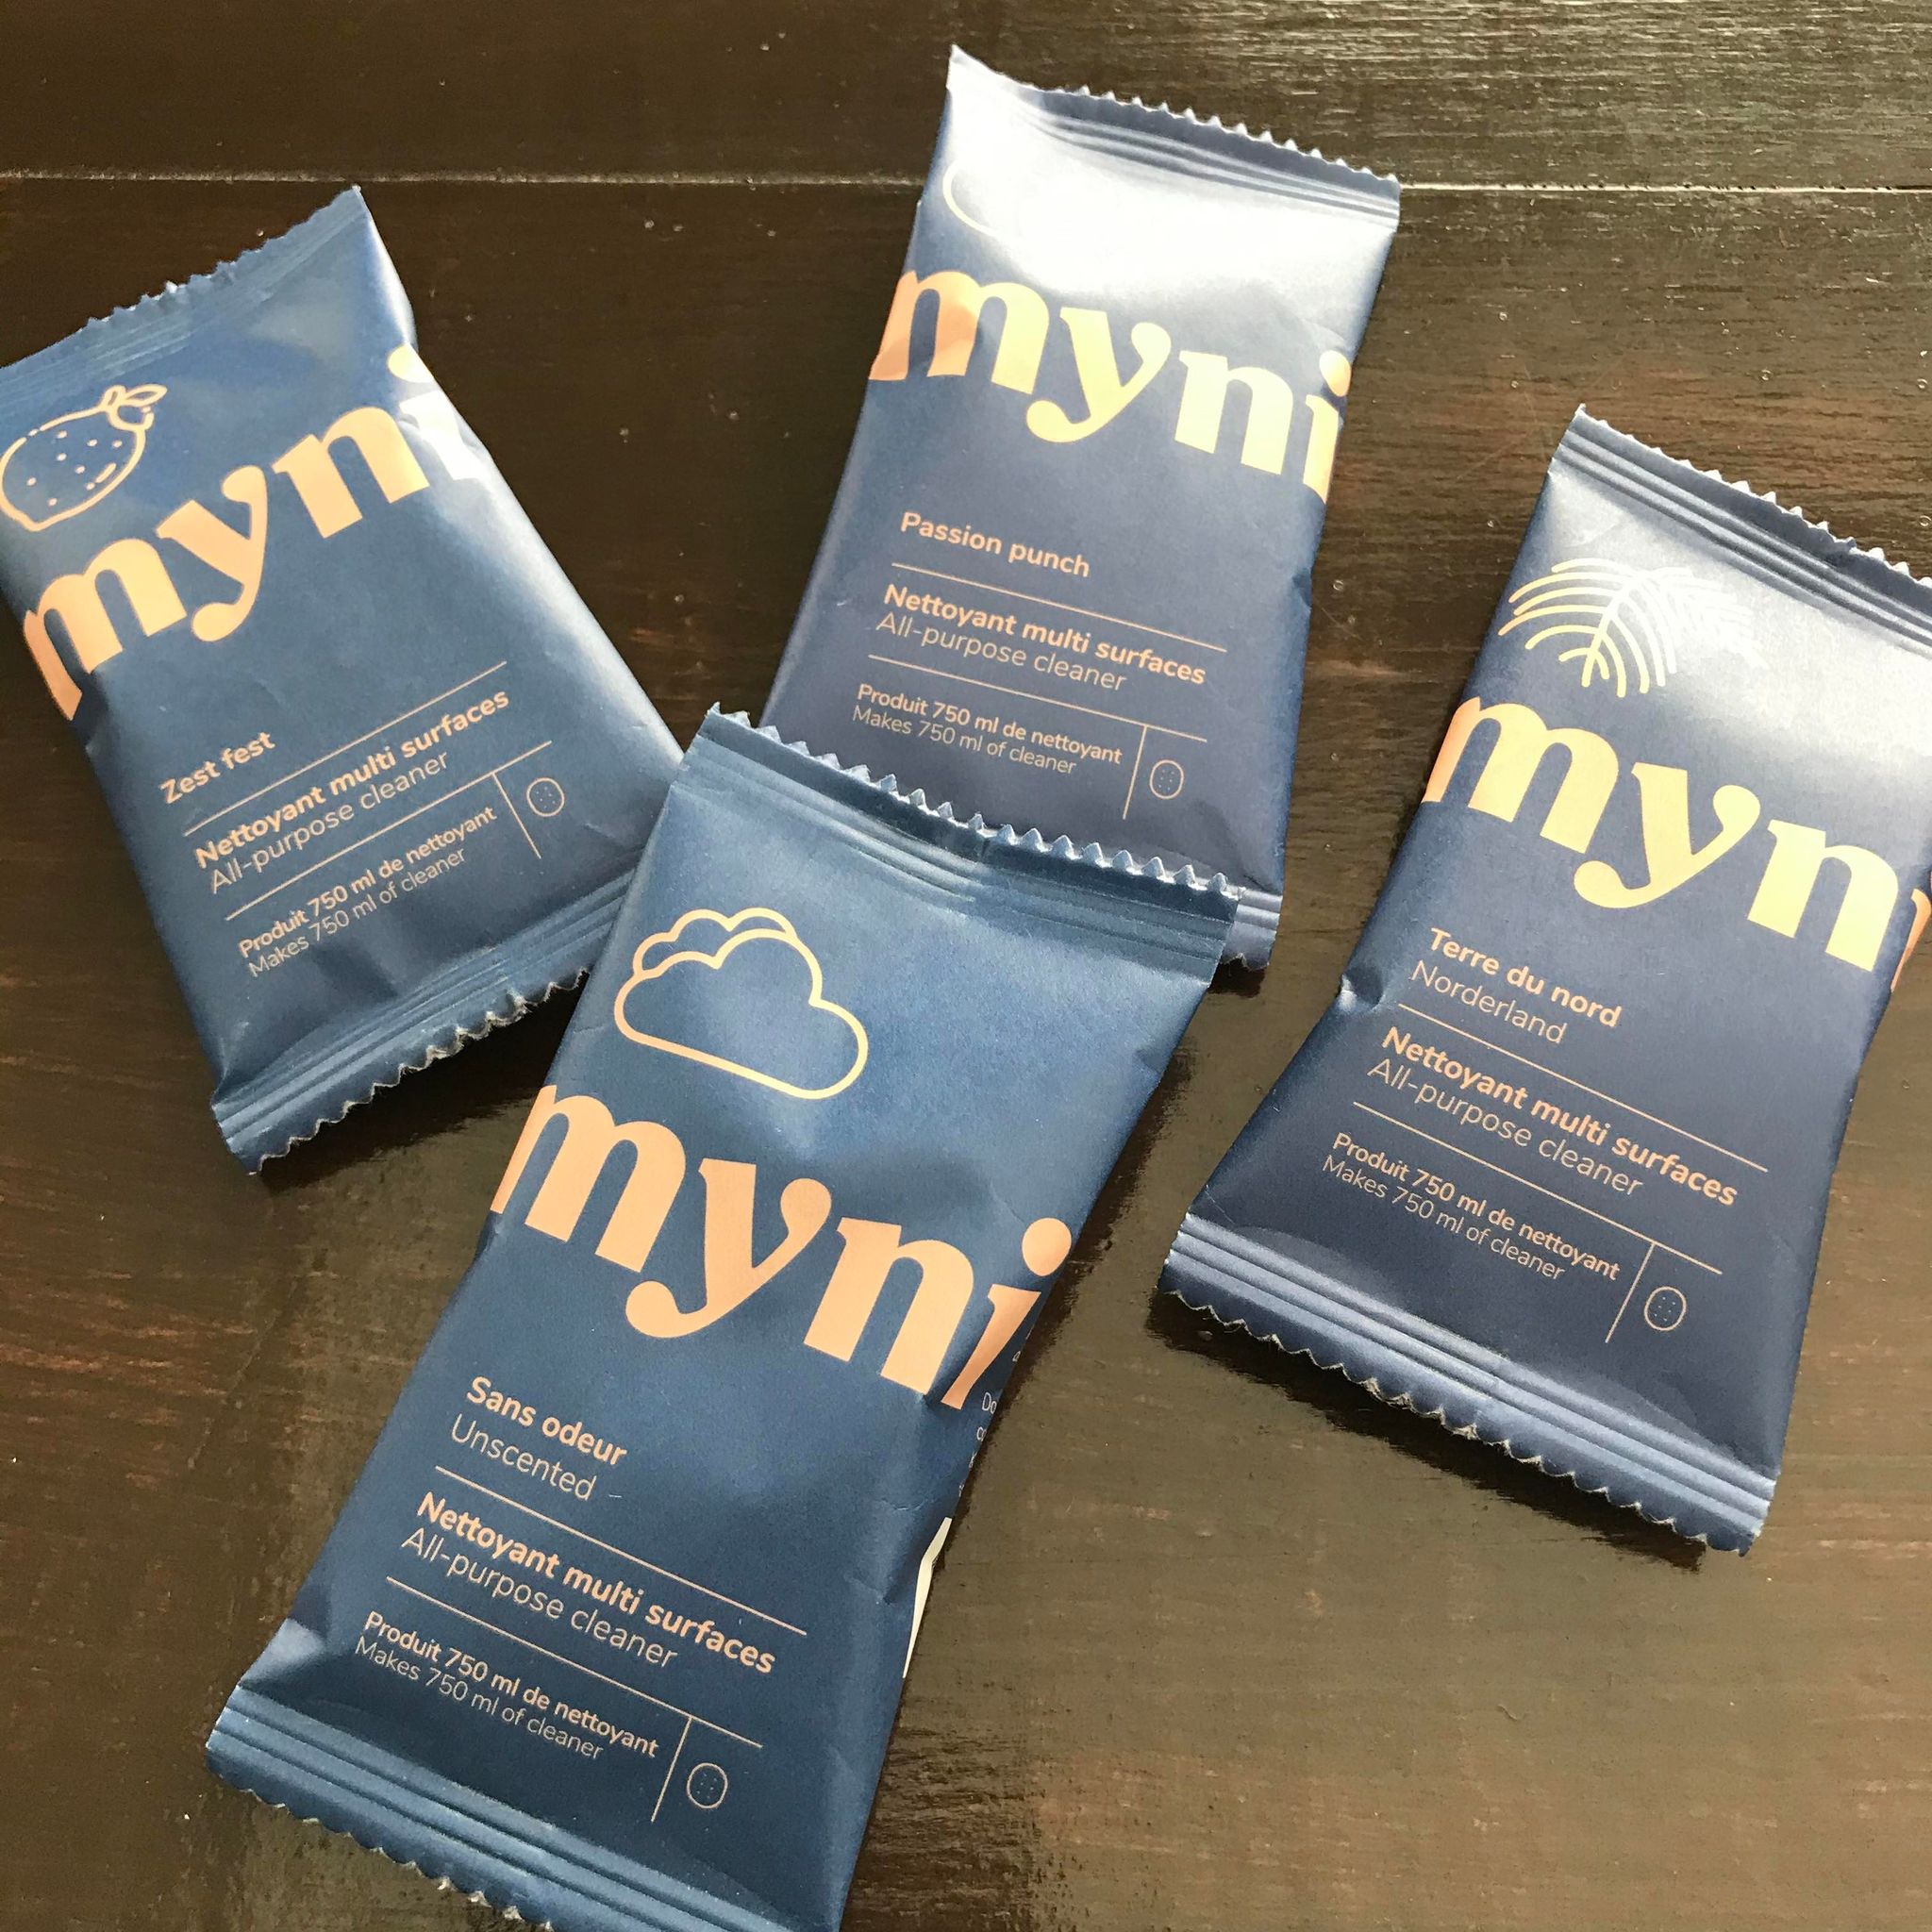 all purpose cleaning concentrate tablets made in canada by myni and available unscented and in nordeland (black spruce), zest fest (lemon mint) and passion punch (grapefruit mango) scents in compostable pouches.